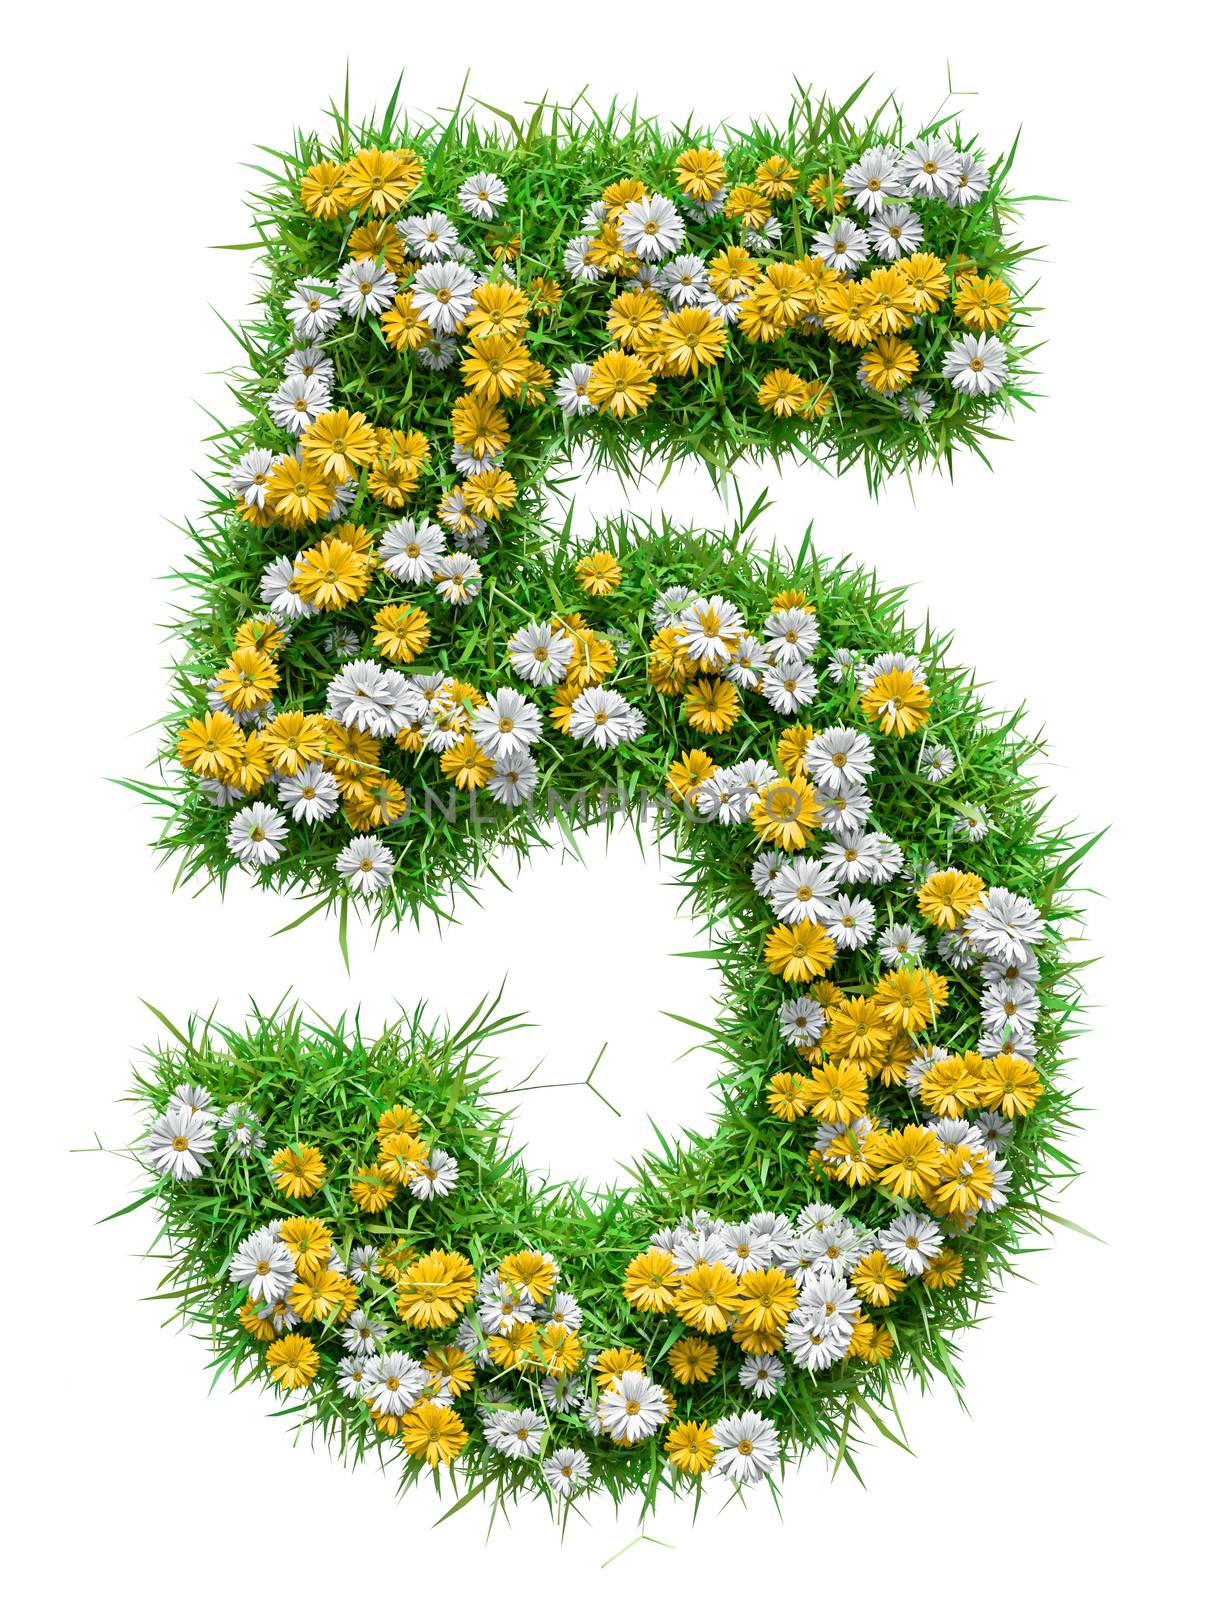 Number 5 of Green Grass And Flowers, isolated on white background. 3D illustration